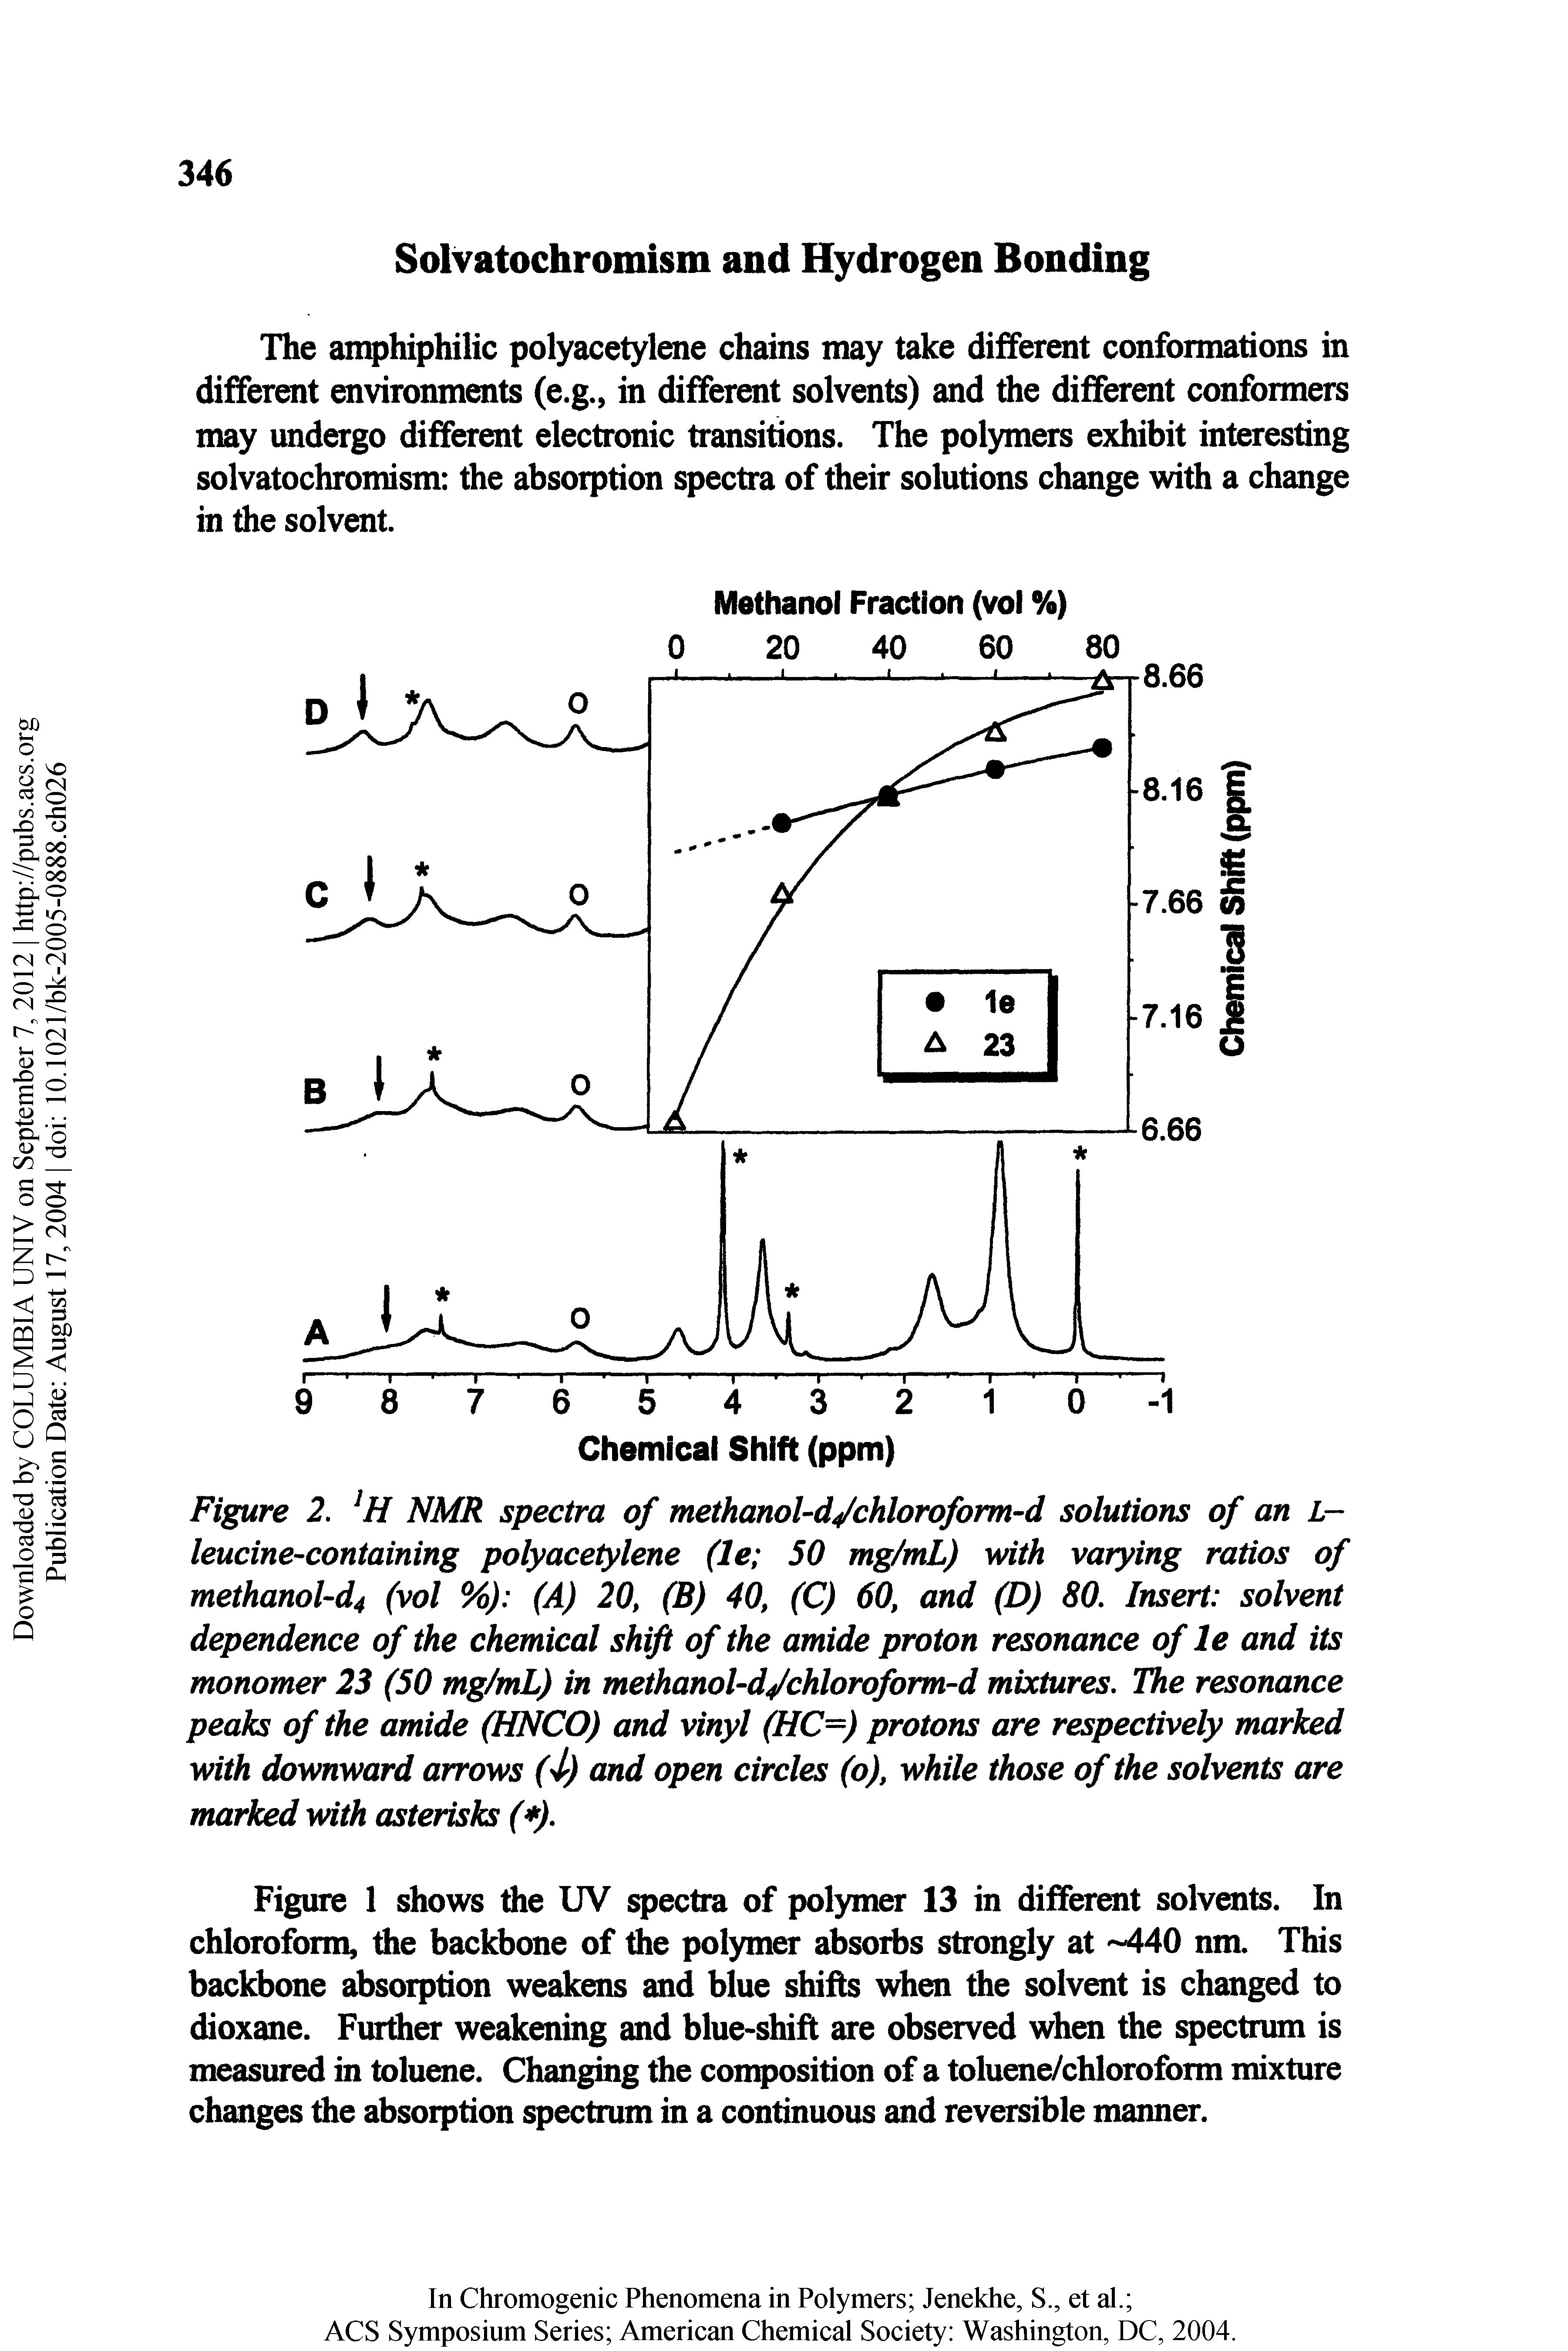 Figure 2. NMR spectra of methanol-d/chloroform-d solutions of an L-leucine-containing polyacetylene (le 50 mg/mL) with varying ratios of methanol-d4 (vol %) (A) 20, (B) 40, (C) 60, and (D) 80, Insert solvent dependence of the chemical shift of the amide proton resonance of le and its monomer 23 (50 mg/mL) in methanol-dychloroform-d mixtures. The resonance peaks of the amide (HNCO) and vinyl (HC-) protons are respectively marked with downward arrows (>l) and open circles (o), while those of the solvents are marked with asterisks ( ),...